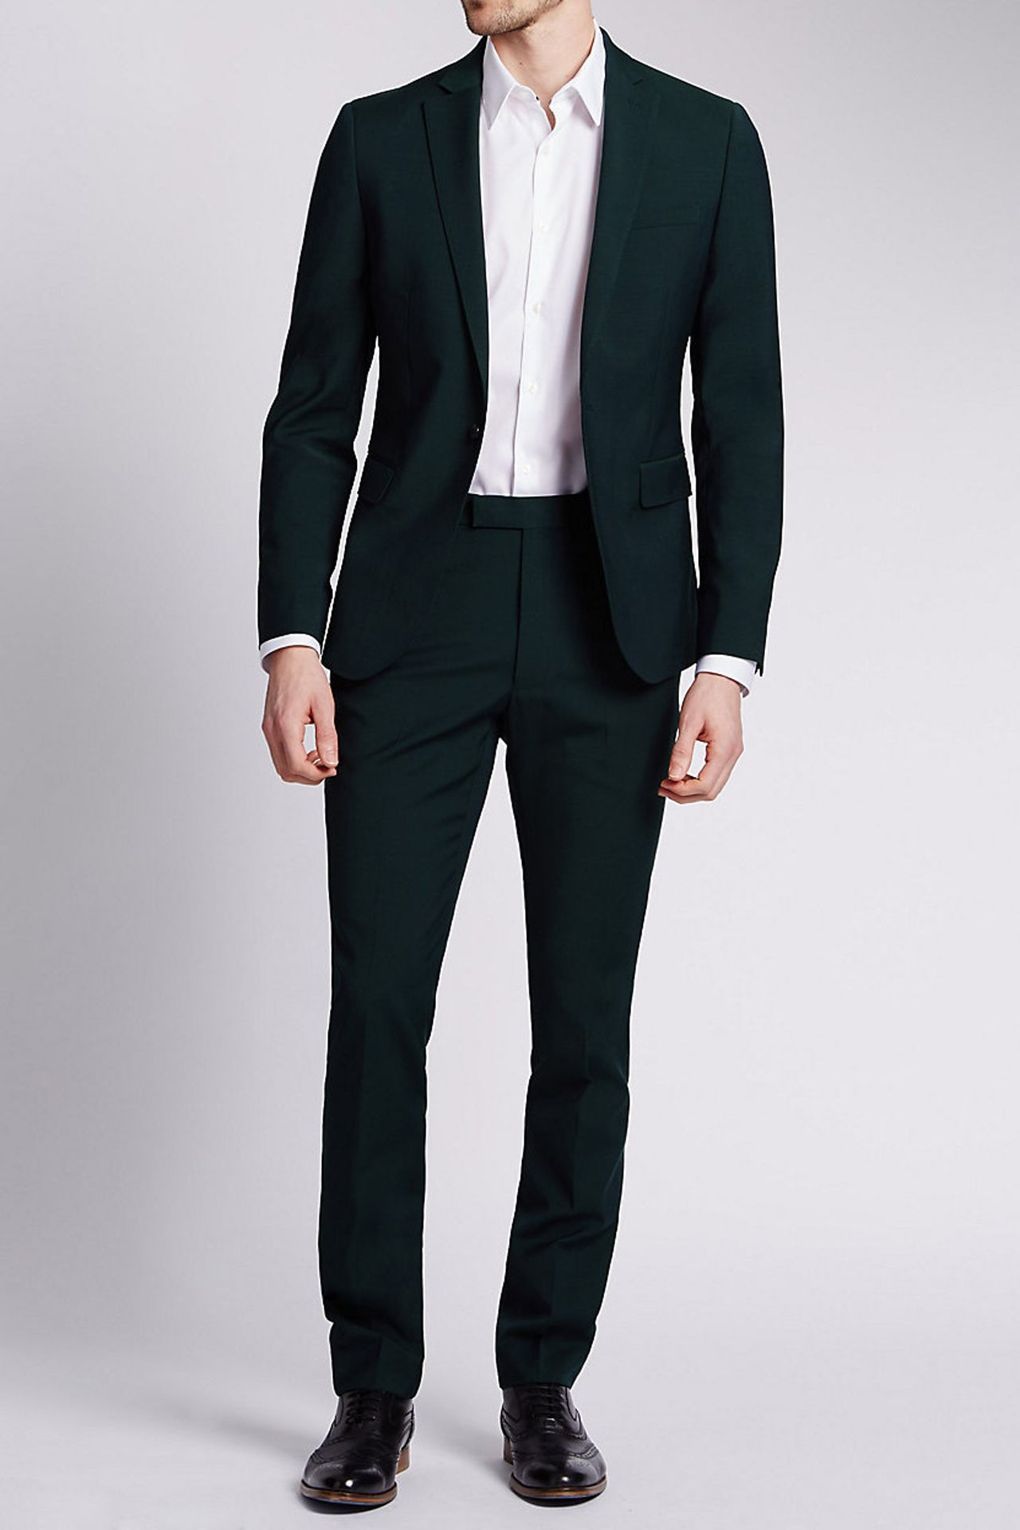 Getting the right fit for your slim fit
suit